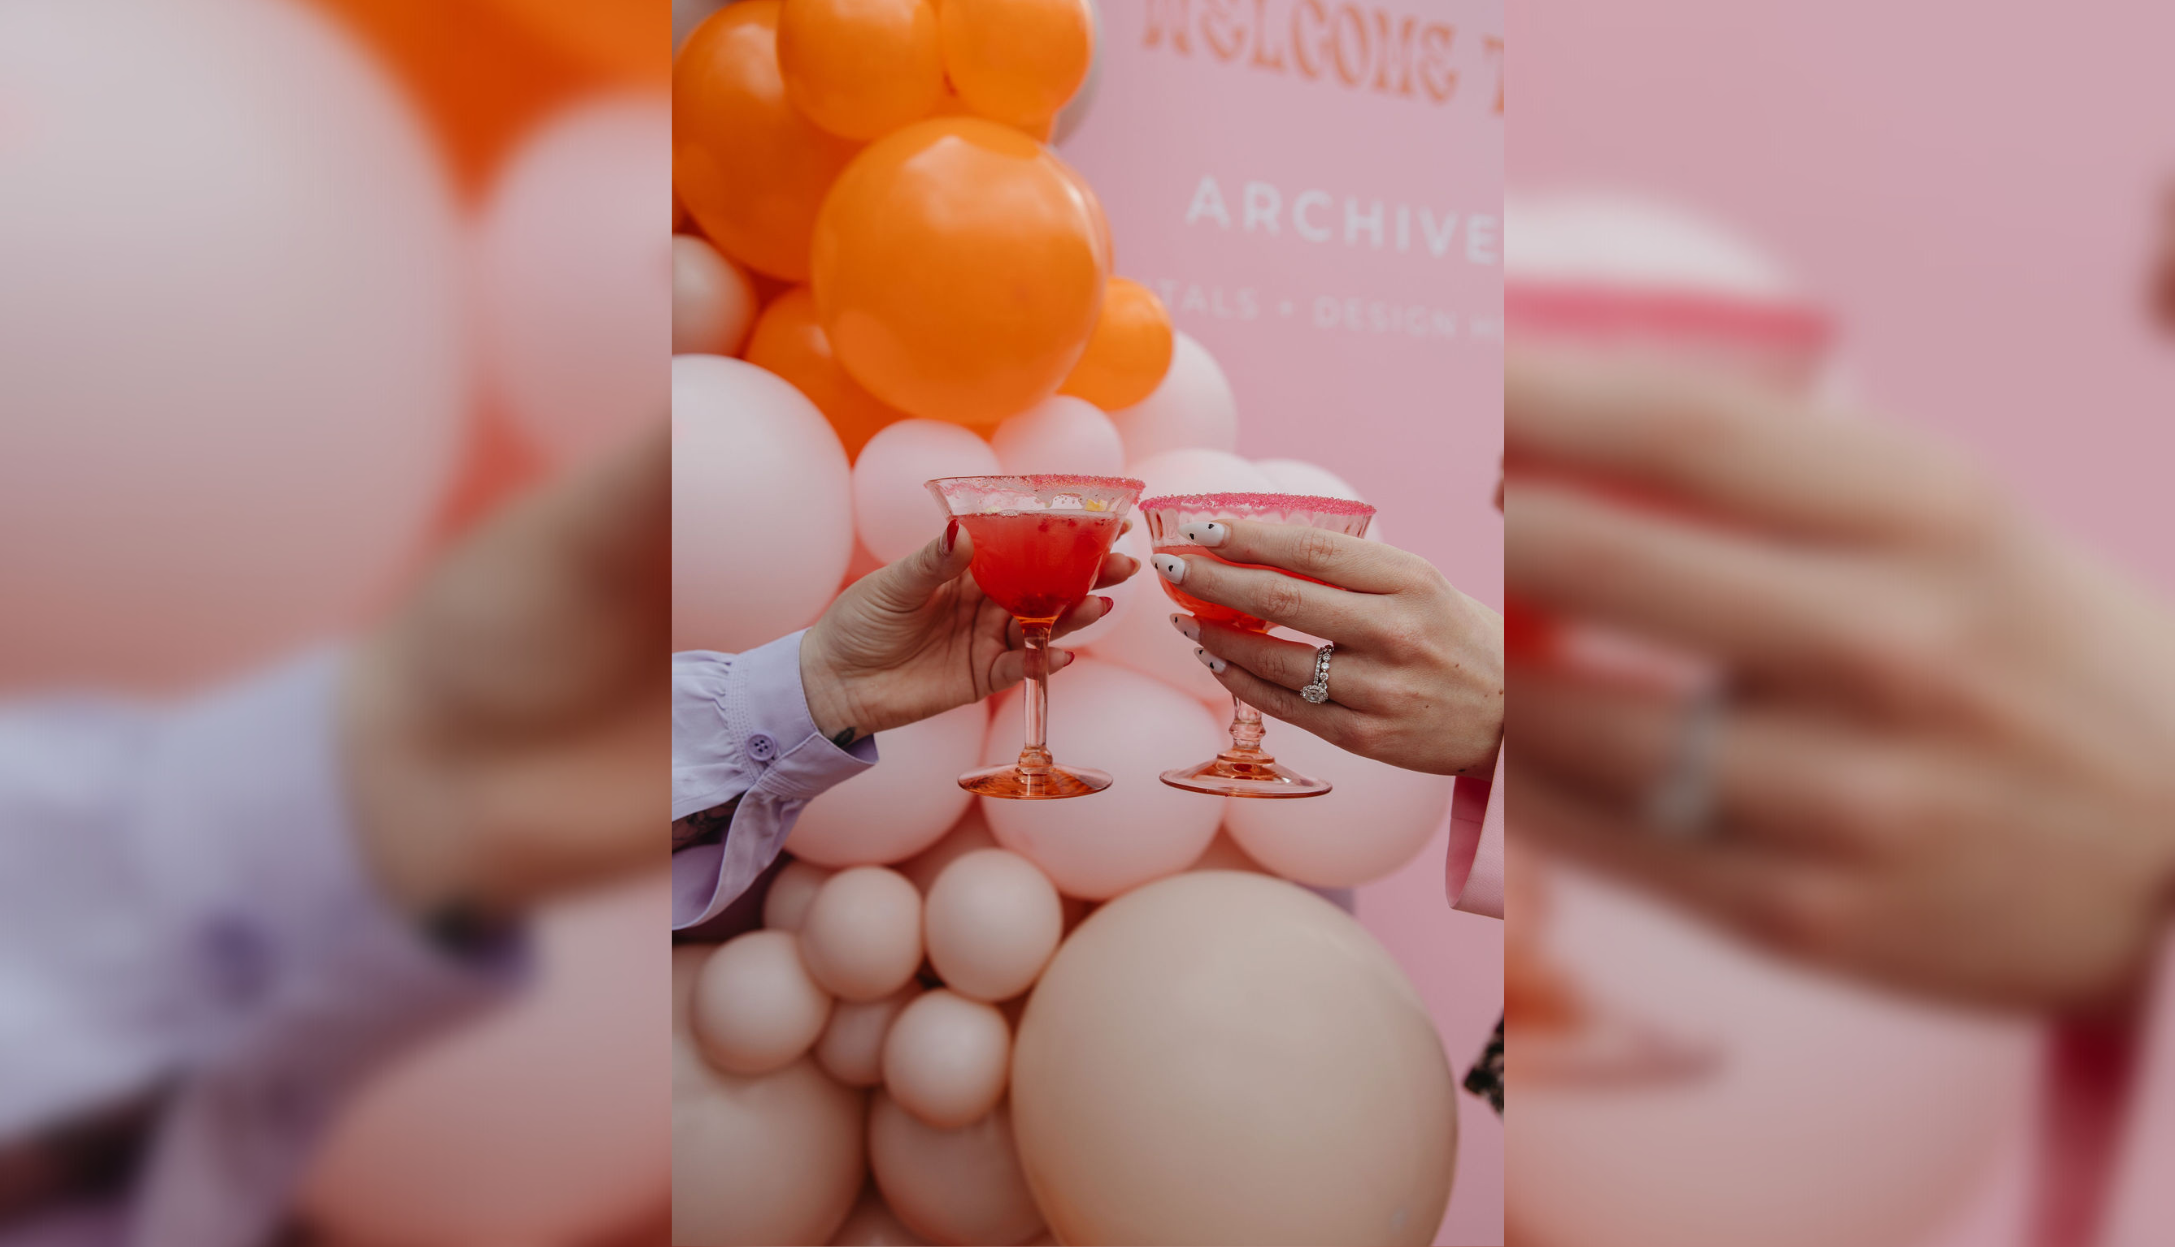 Archive throws a Valentine's Day party